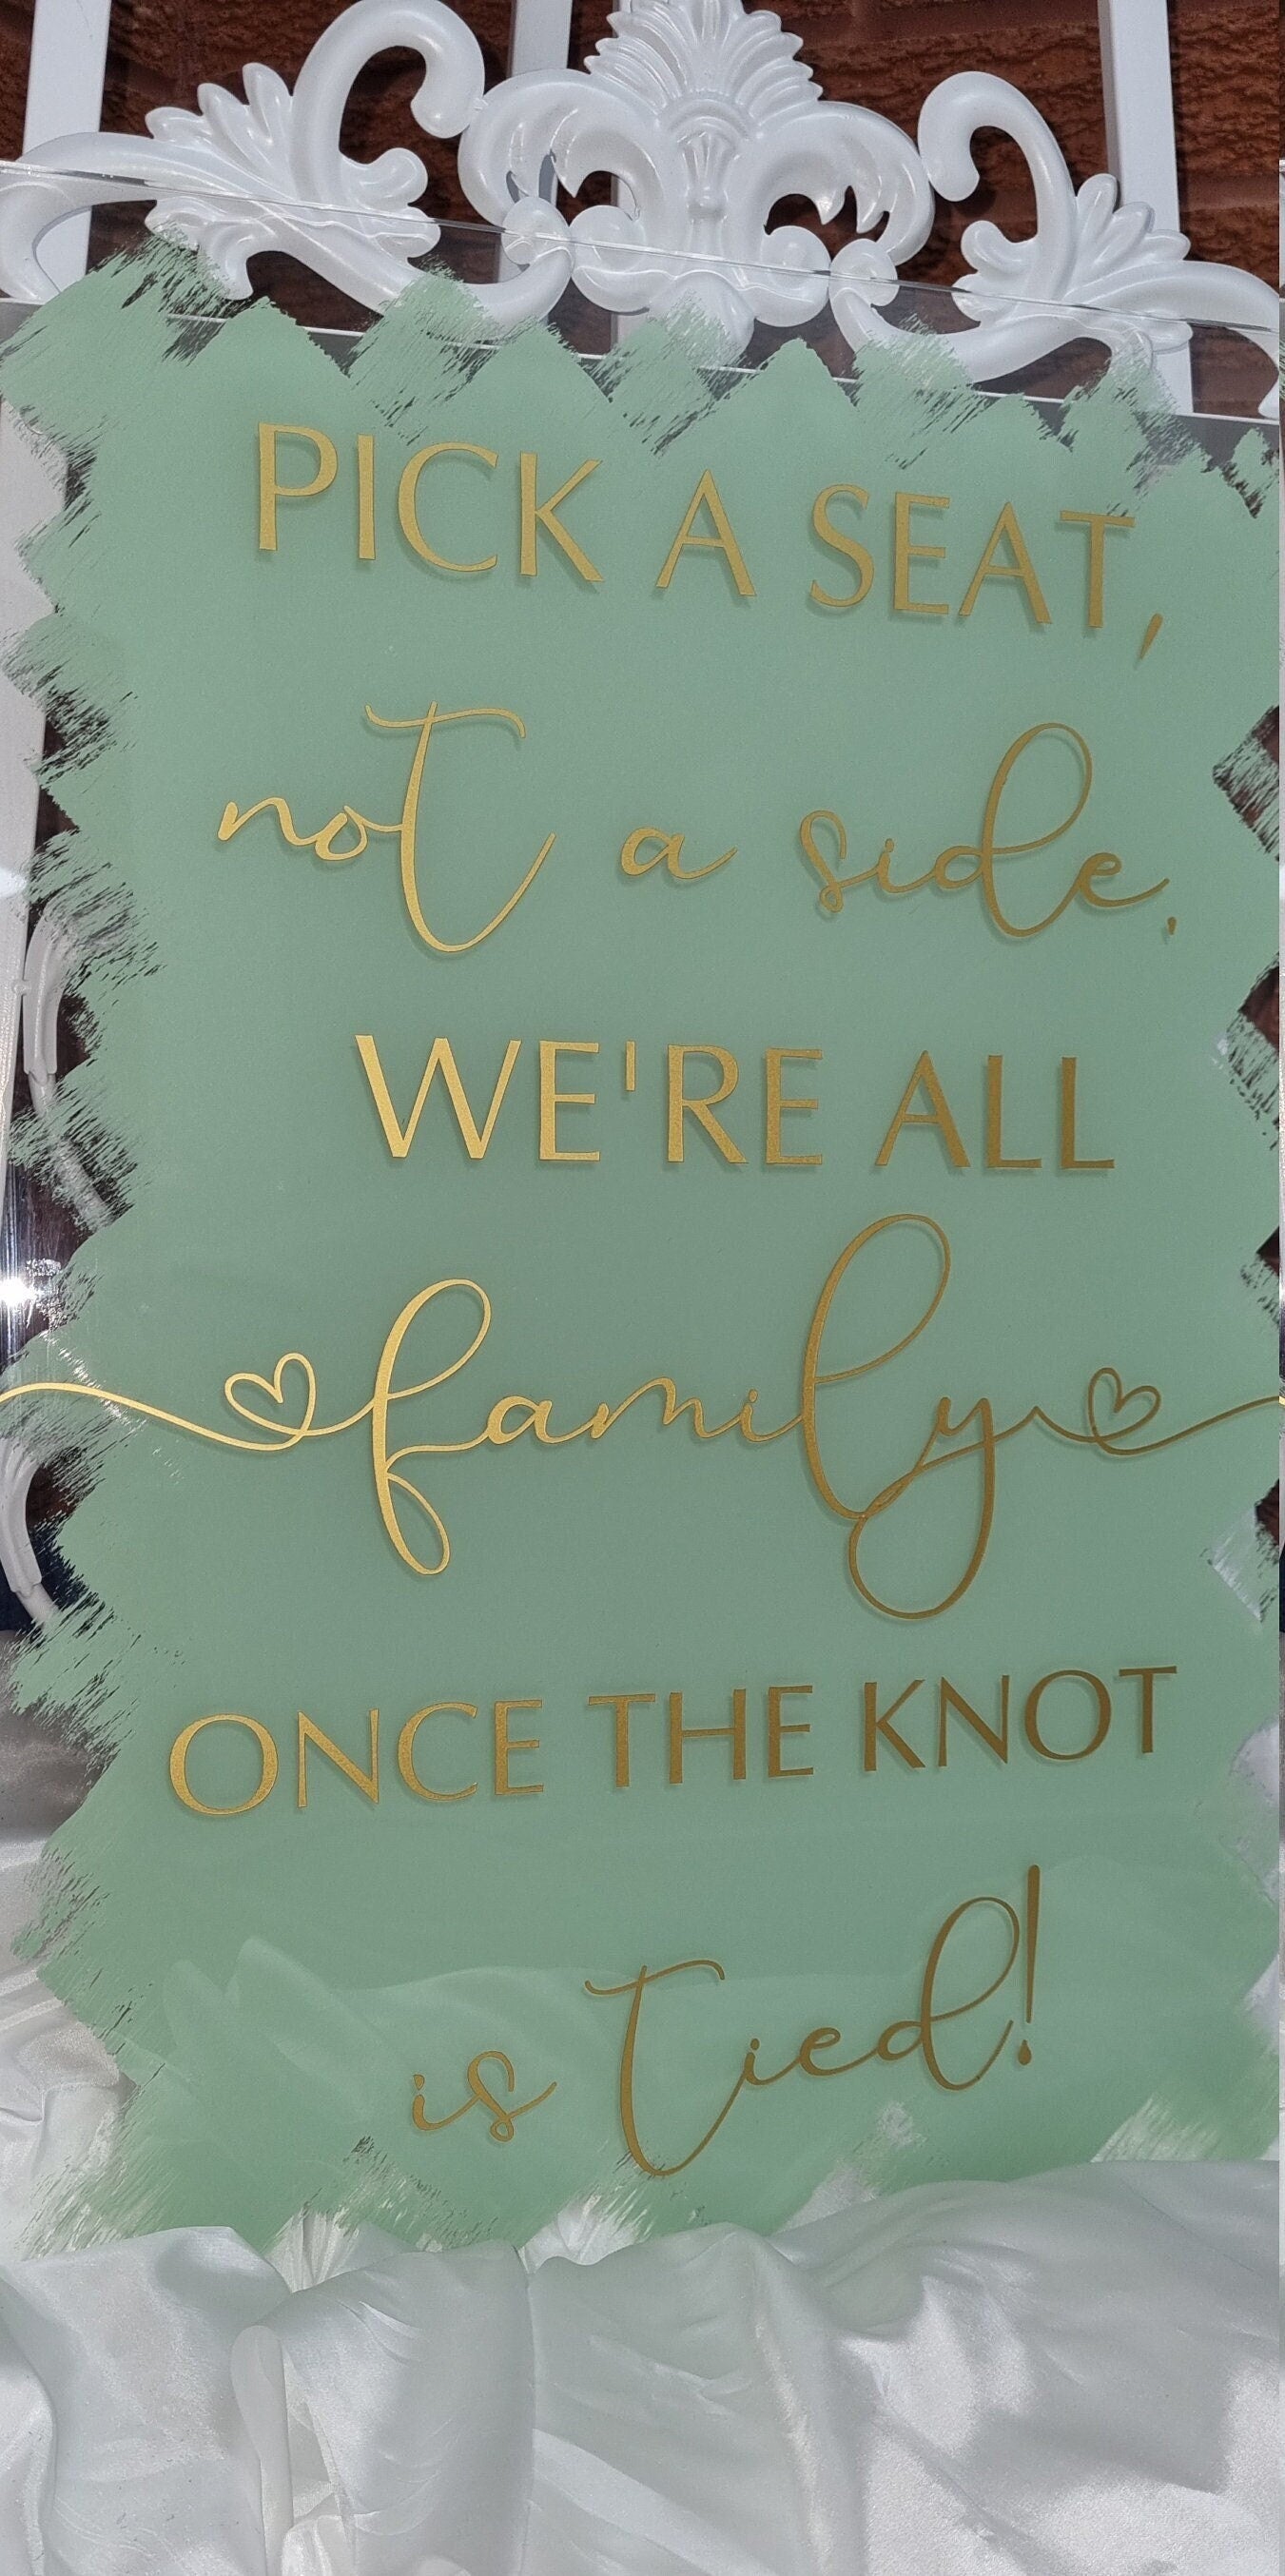 Painted Acrylic Welcome Wedding Sign - "Pick a seat" Not a Side